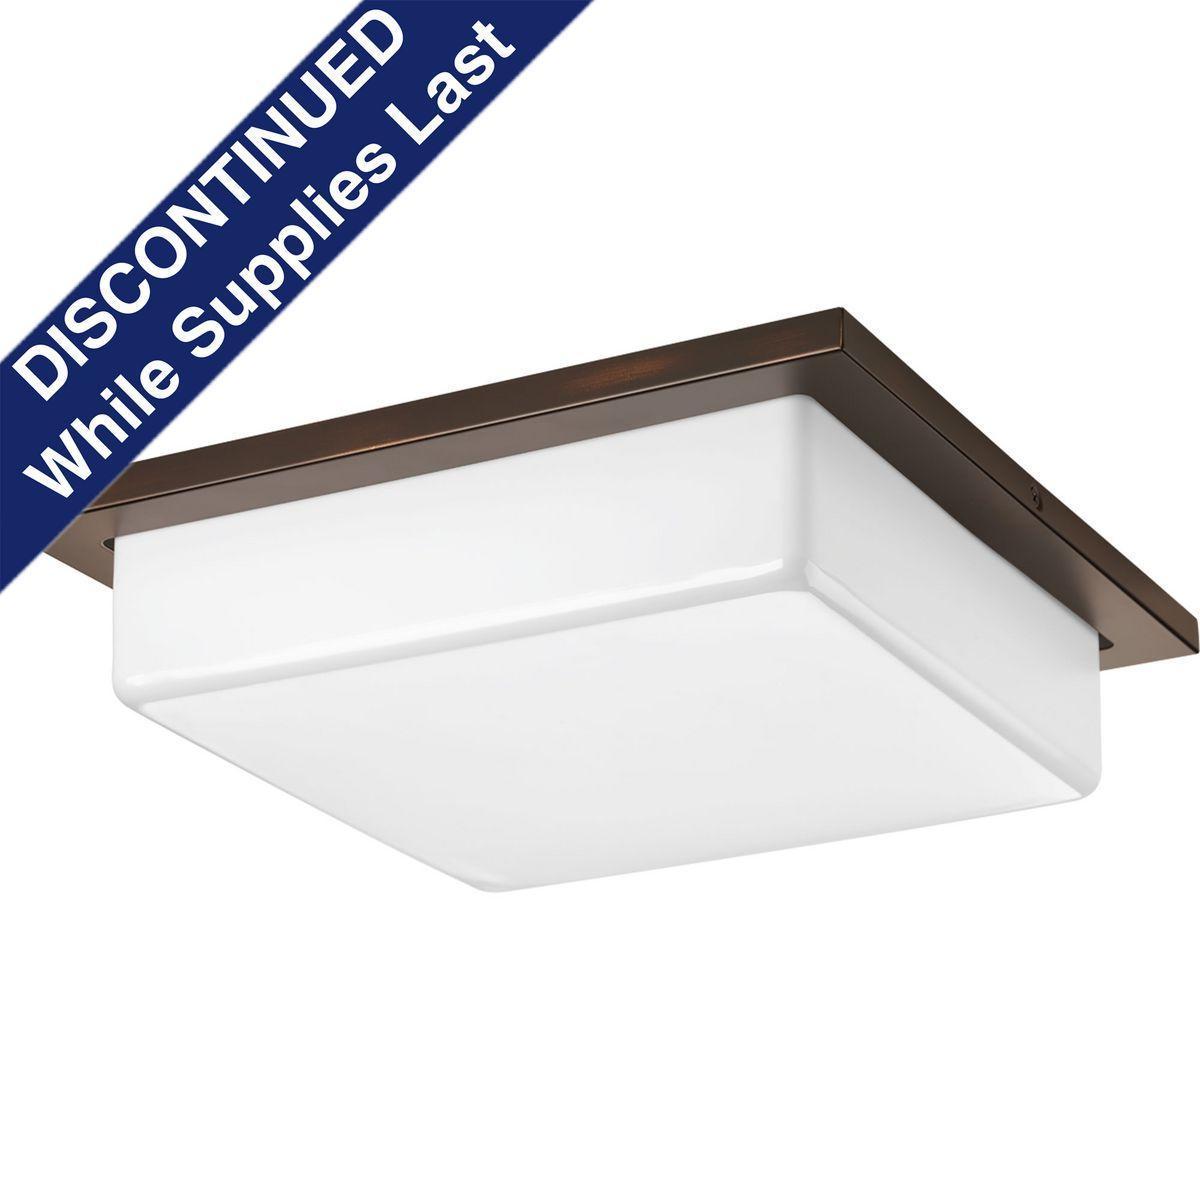 Hubbell P3417-2030K9 Transit is a uniquely styled series with clean design flexibility. This two-light LED close to ceiling featuring a white acrylic diffuser and Antique Bronze finish can mount to either ceiling or wall.  ; Antique Bronze finish. ; White acrylic diffuser. ; 